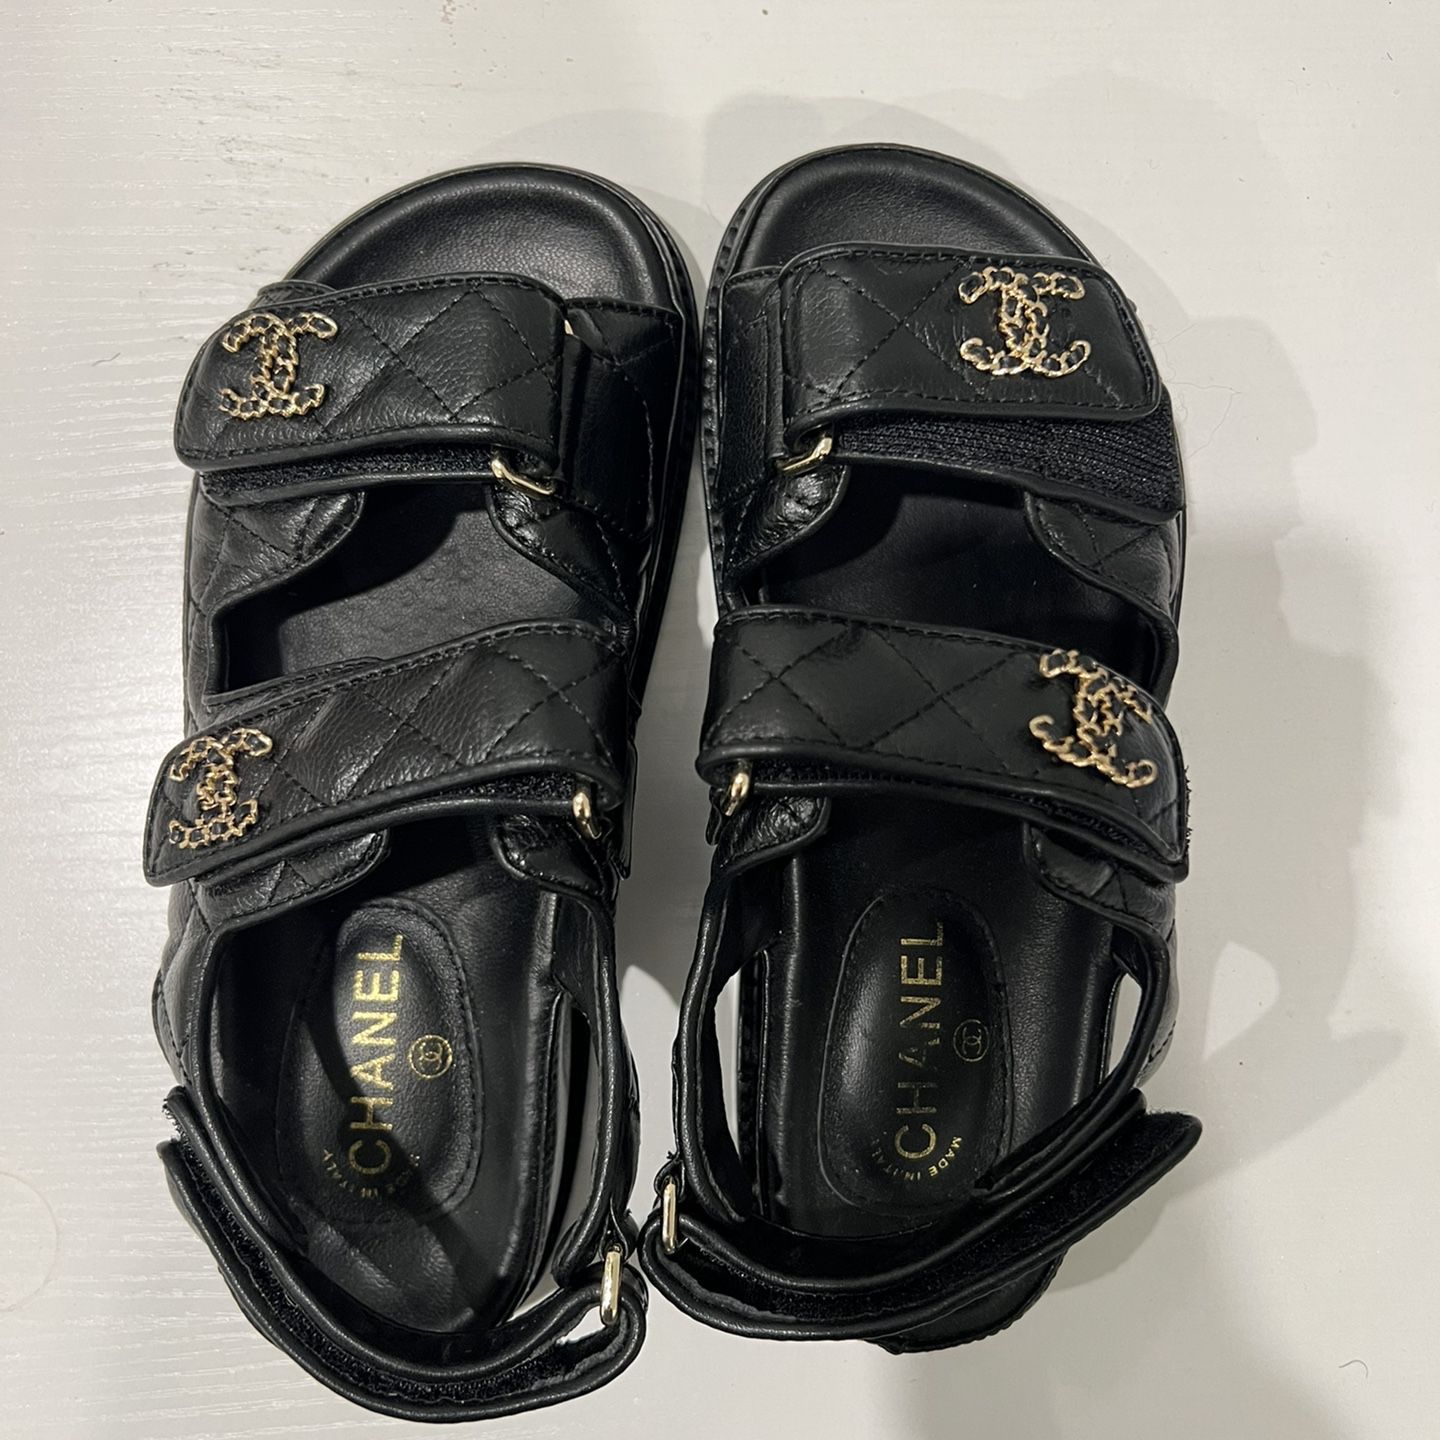 Chanel Sandals for Sale in Bloomington, CA - OfferUp